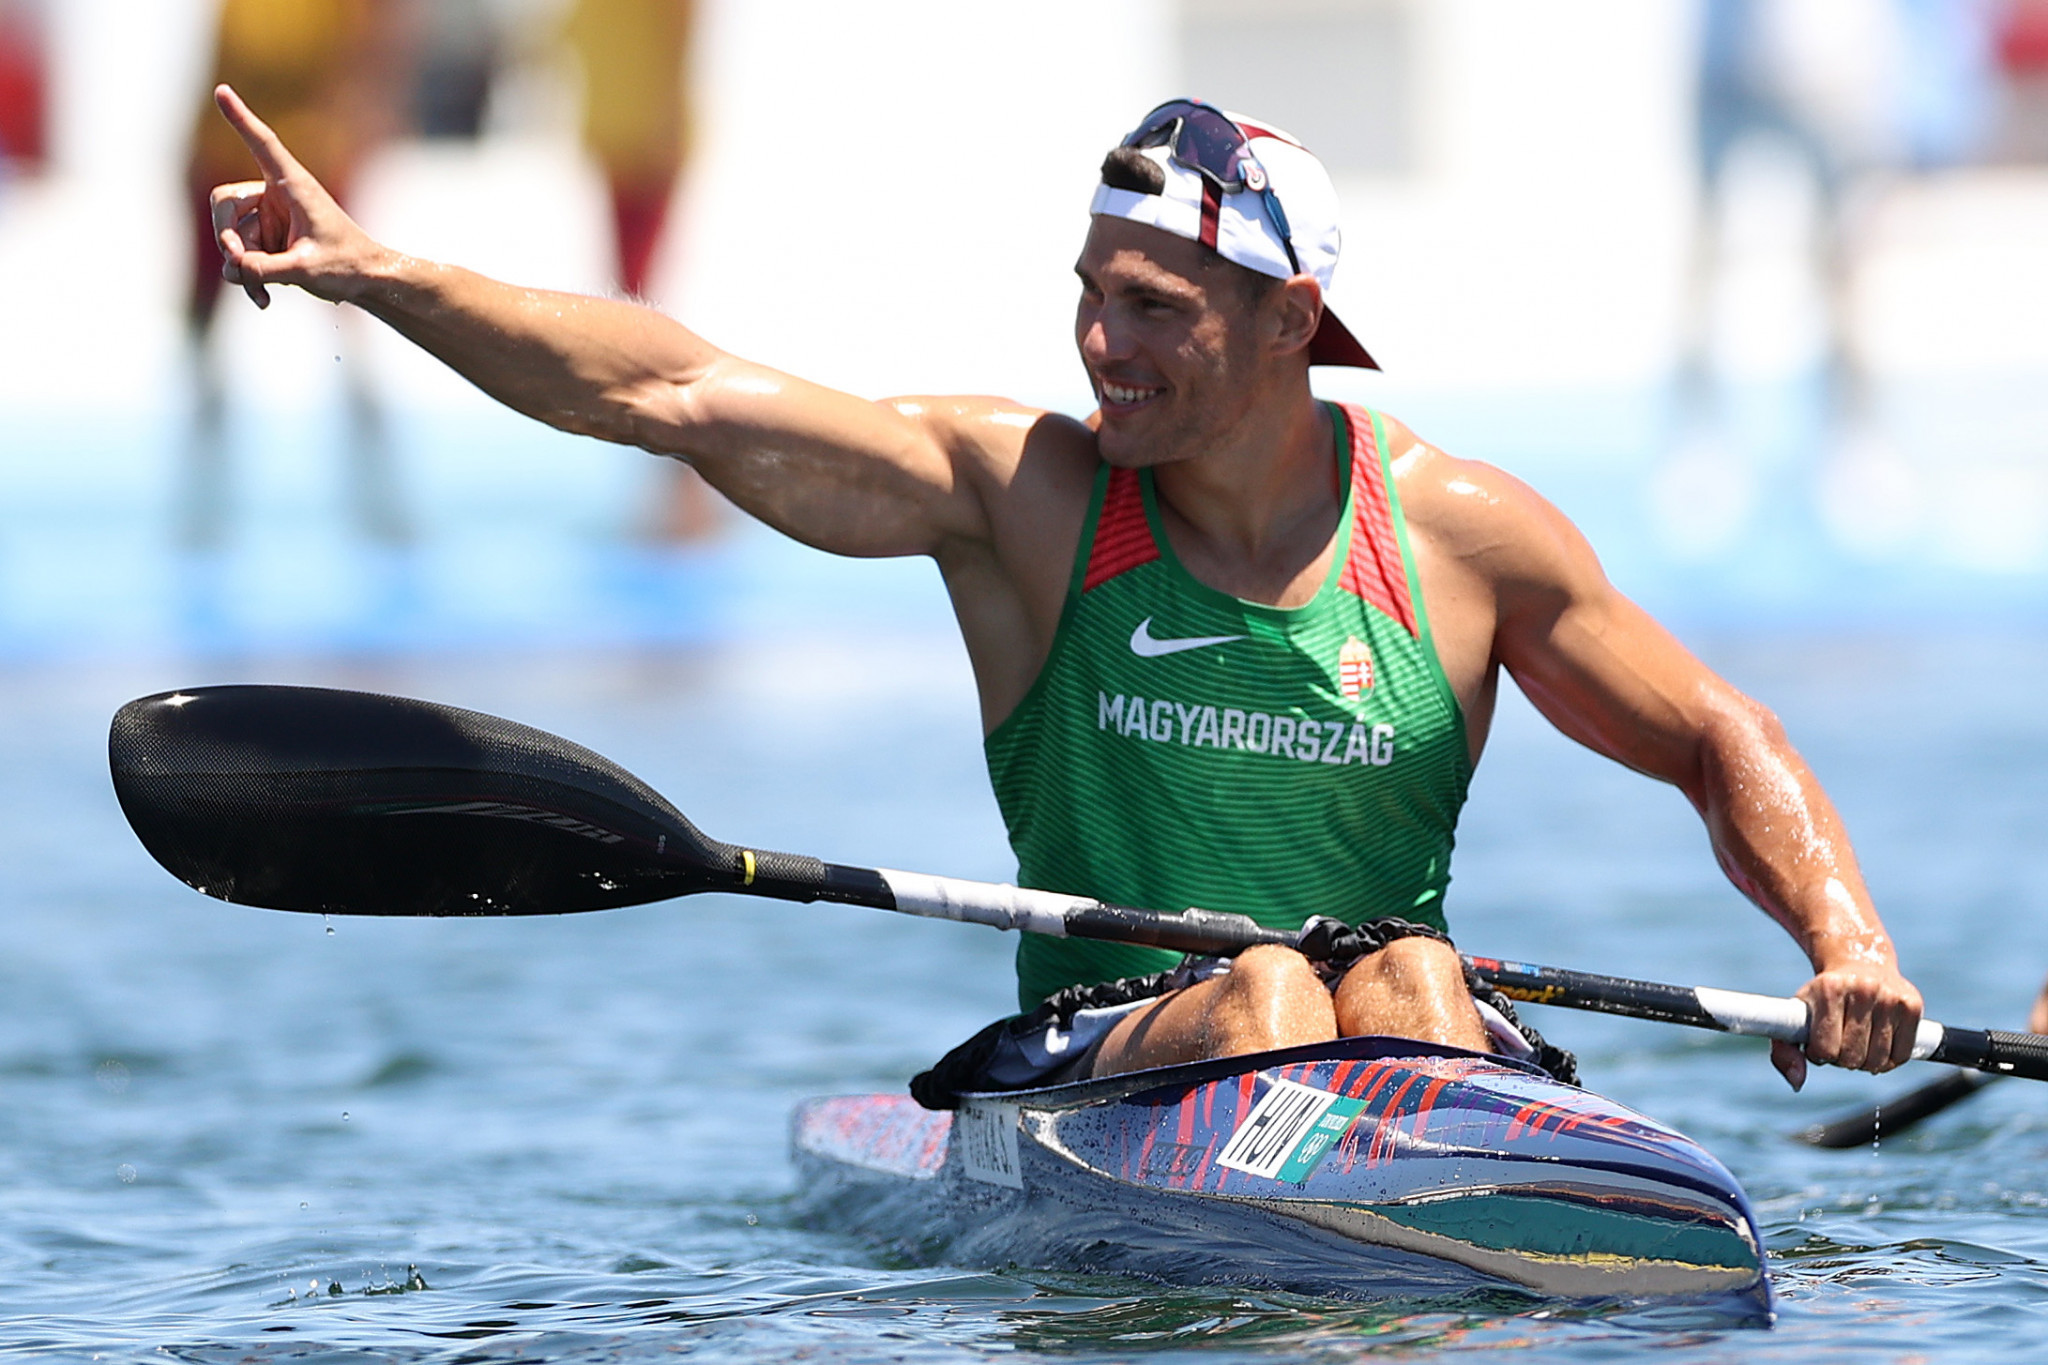 Olympic canoe sprint champion Totka set for inaugural ICF Virtual World Cup